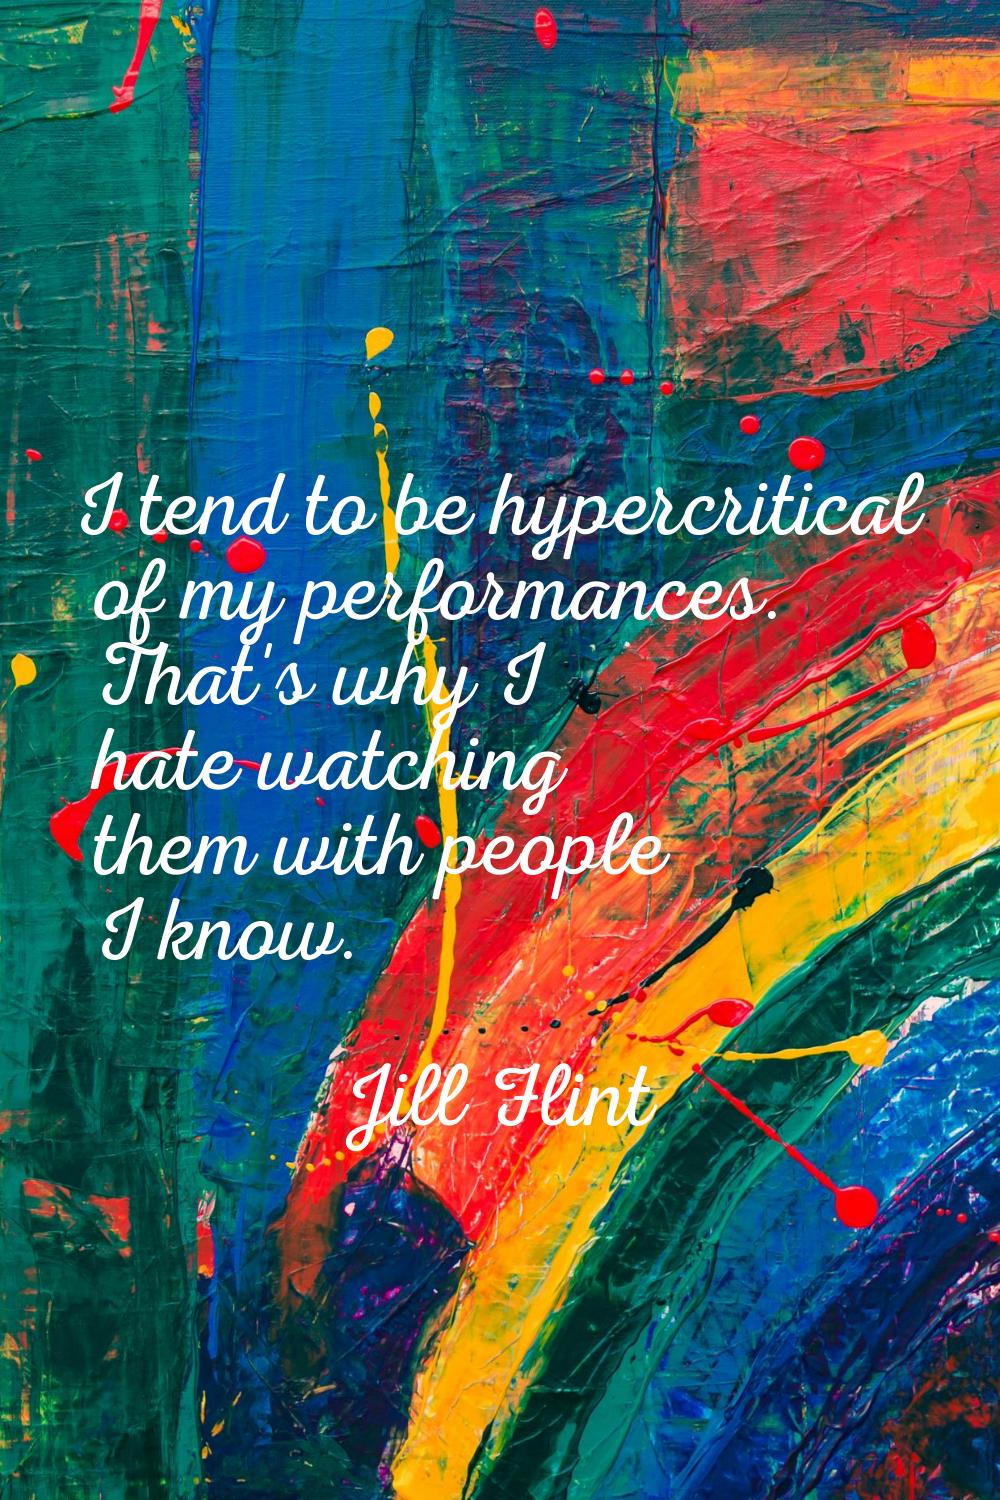 I tend to be hypercritical of my performances. That's why I hate watching them with people I know.